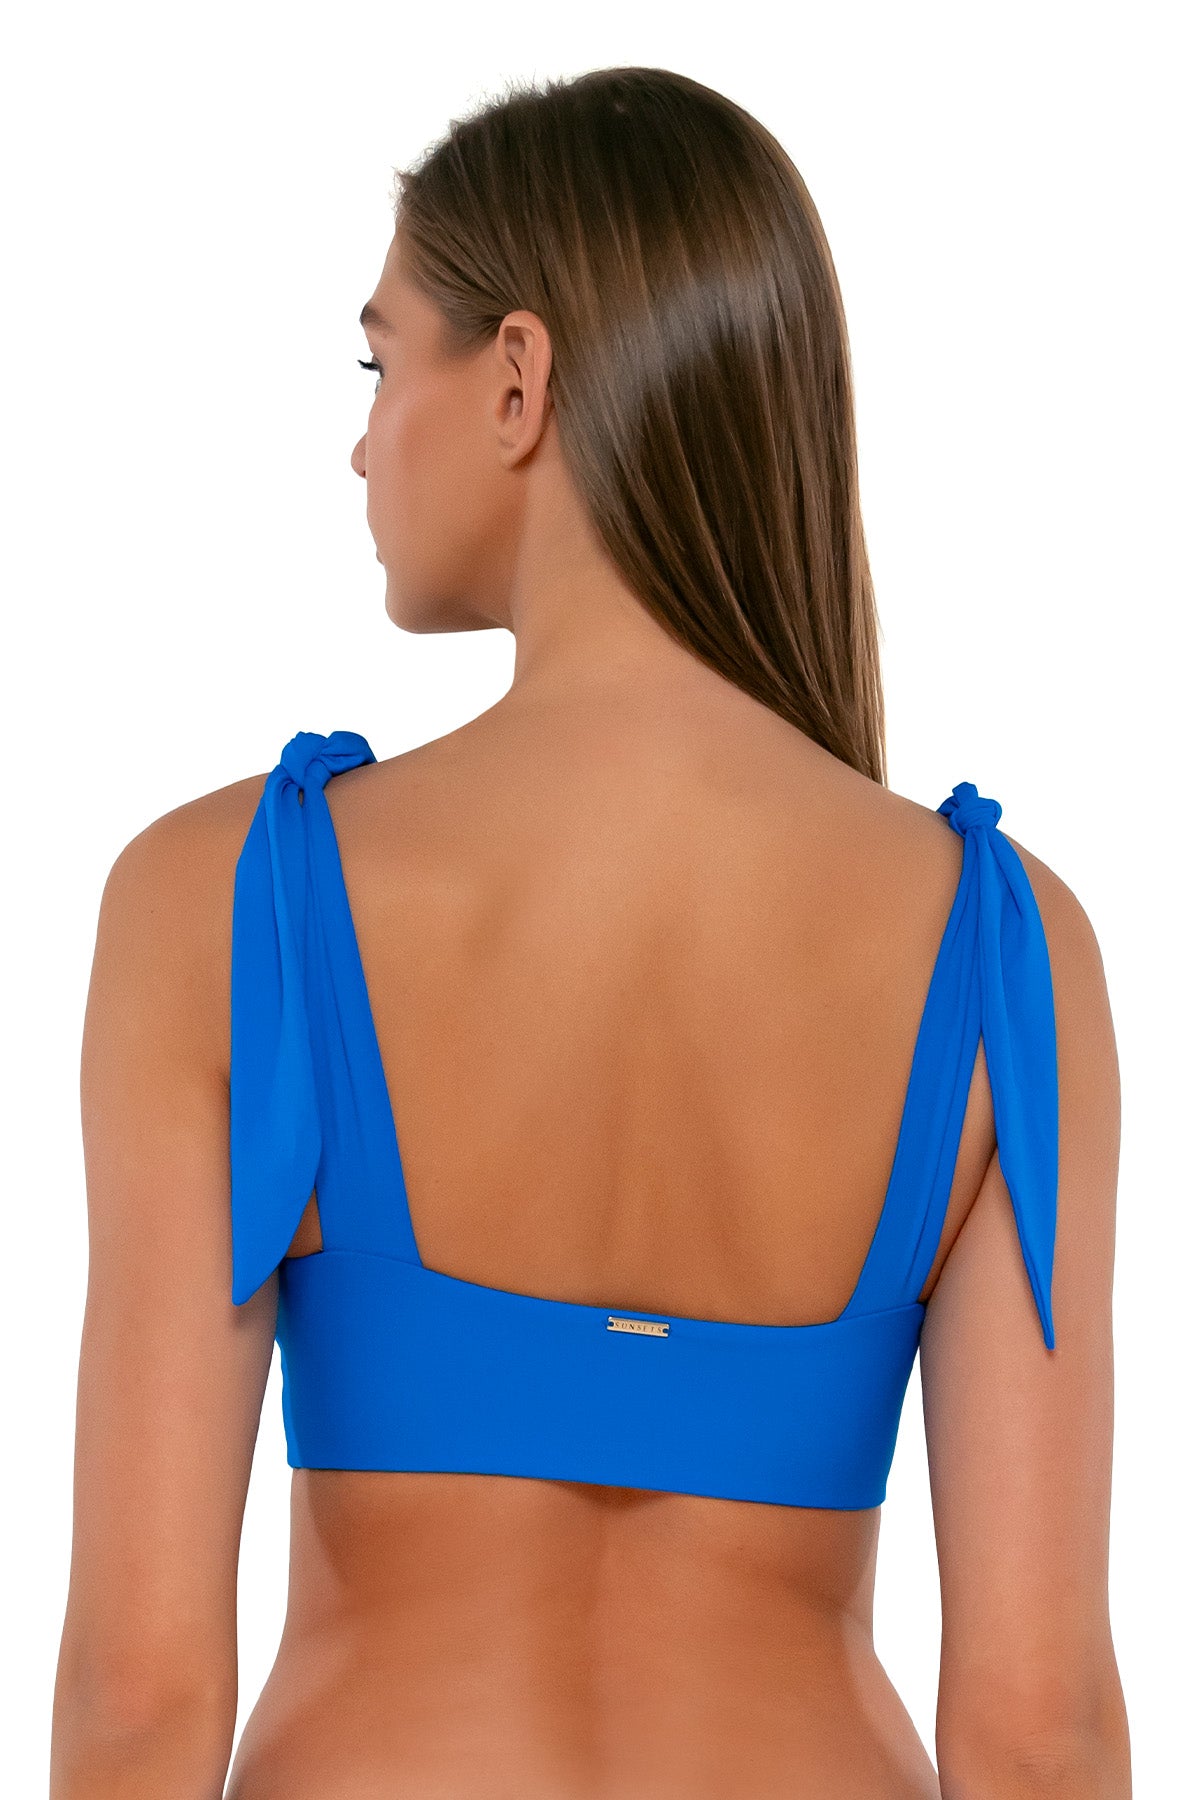 Back pose #1 of Daria wearing Sunsets Electric Blue Lily Top